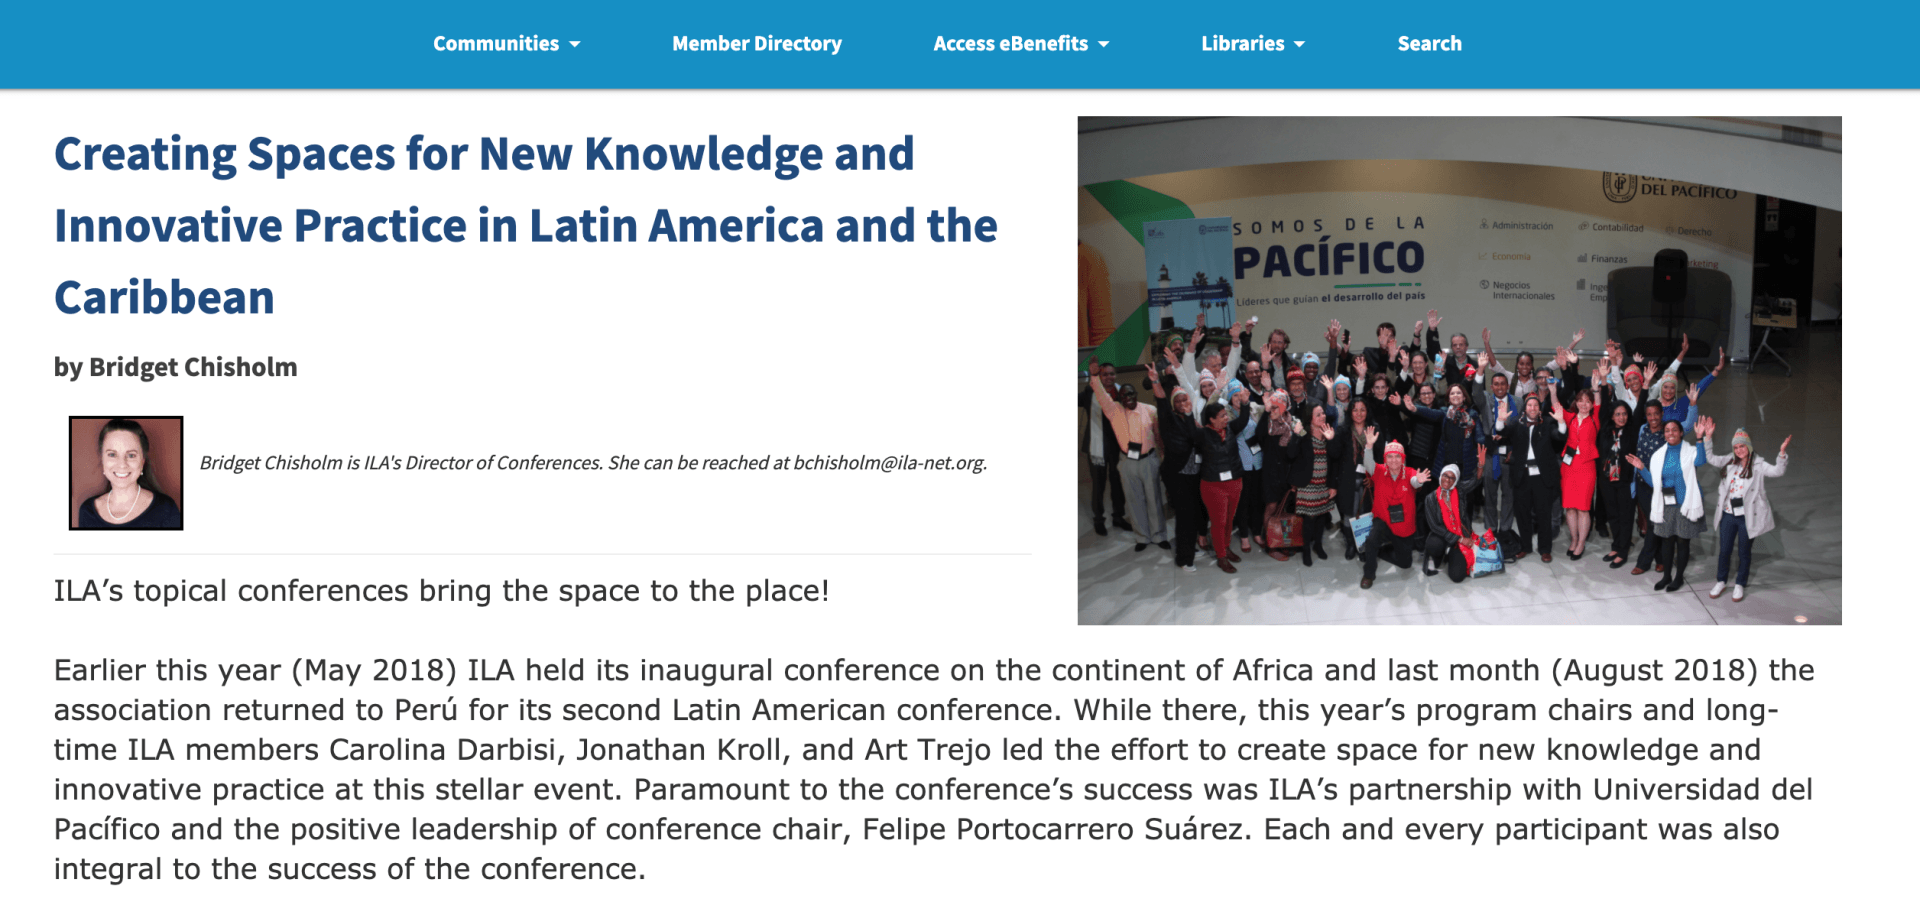 Creating Spaces for New Knowledge and Innovative Practice in Latin America and the Caribbean